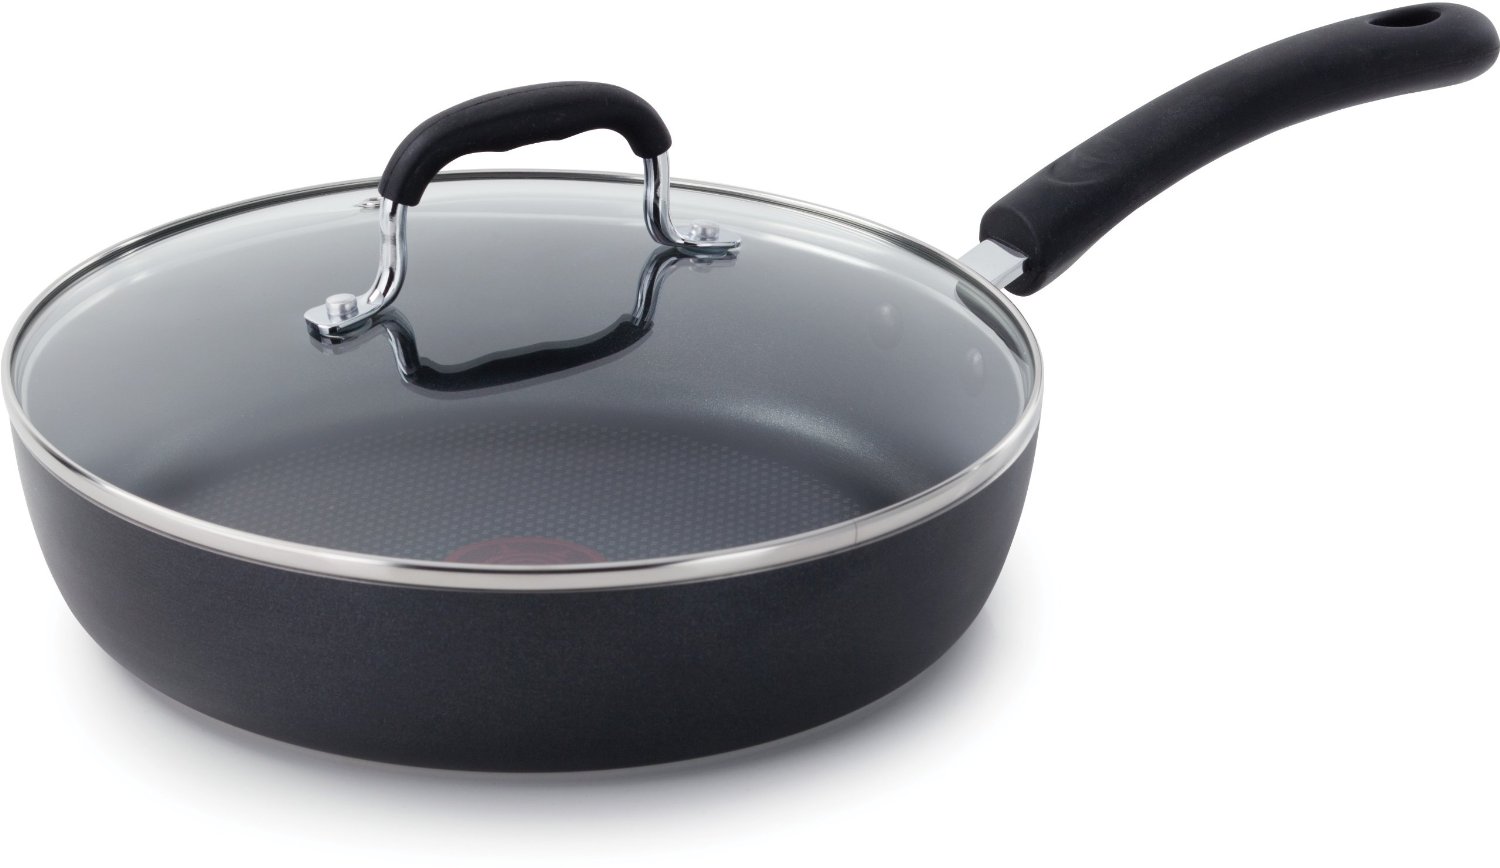 T-fal Lid Cookware 10-Inch Black